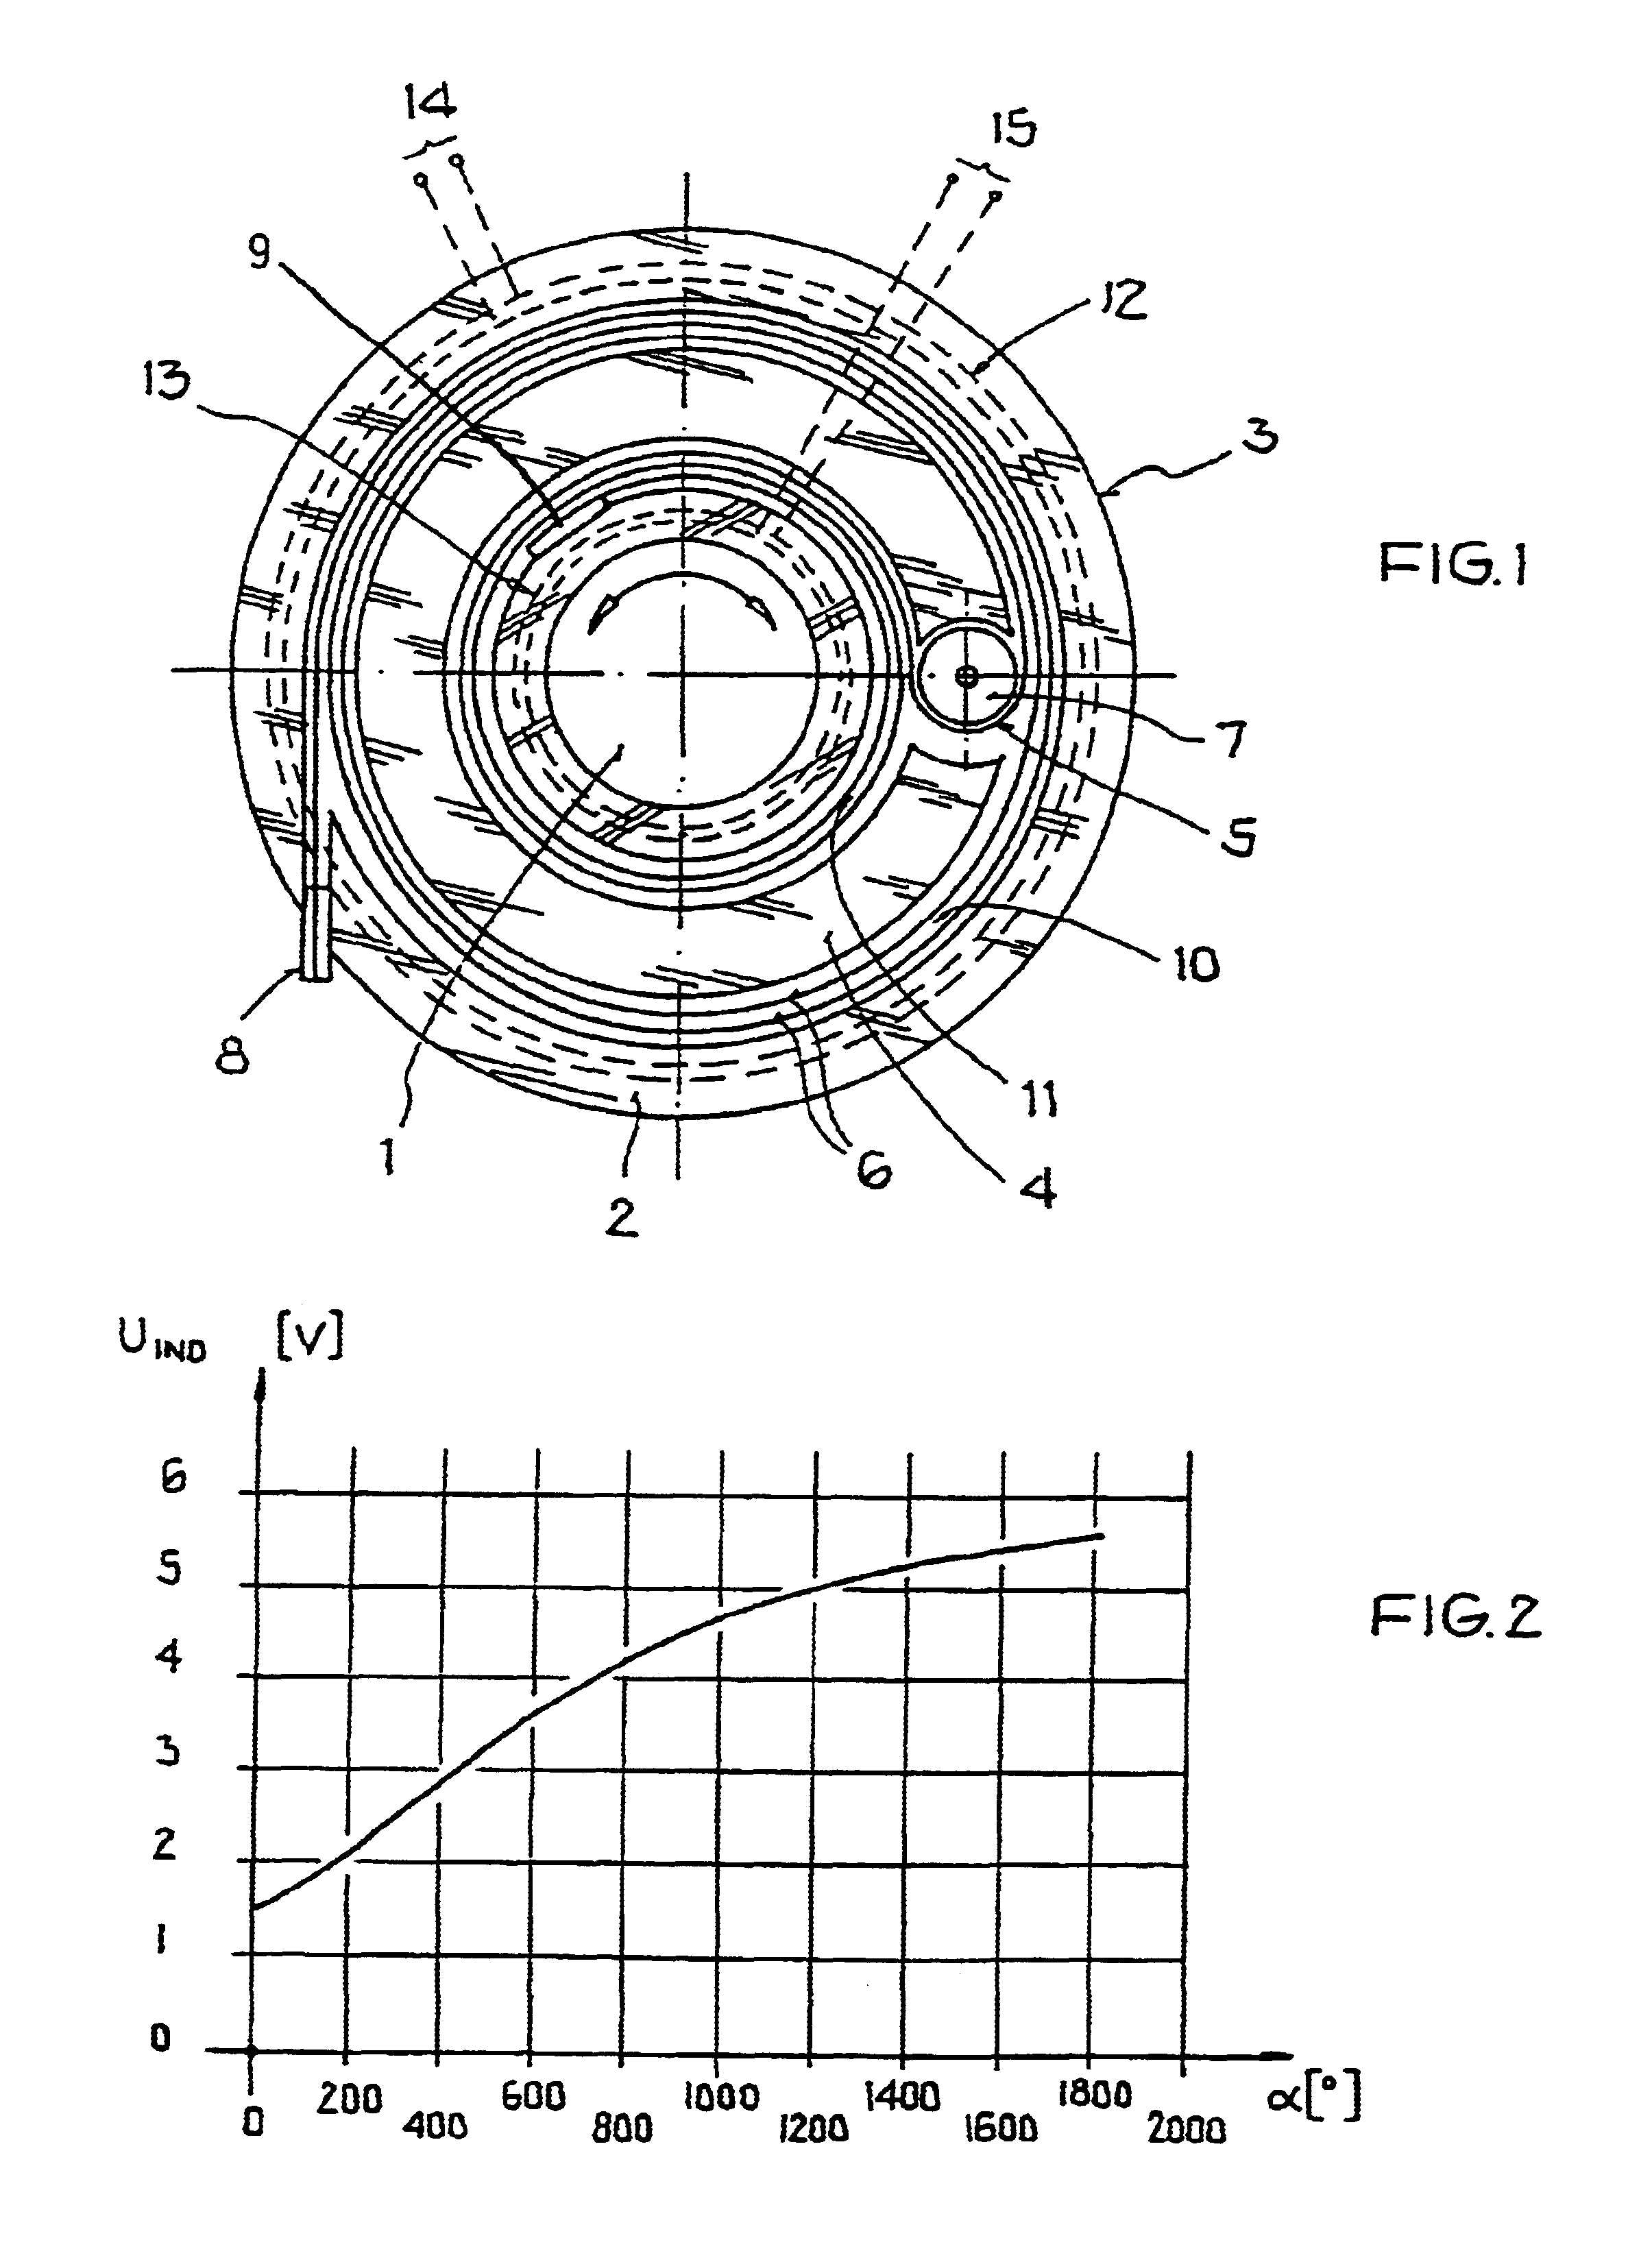 Method for determining the angular position of a rotative part which performs a rotational movement